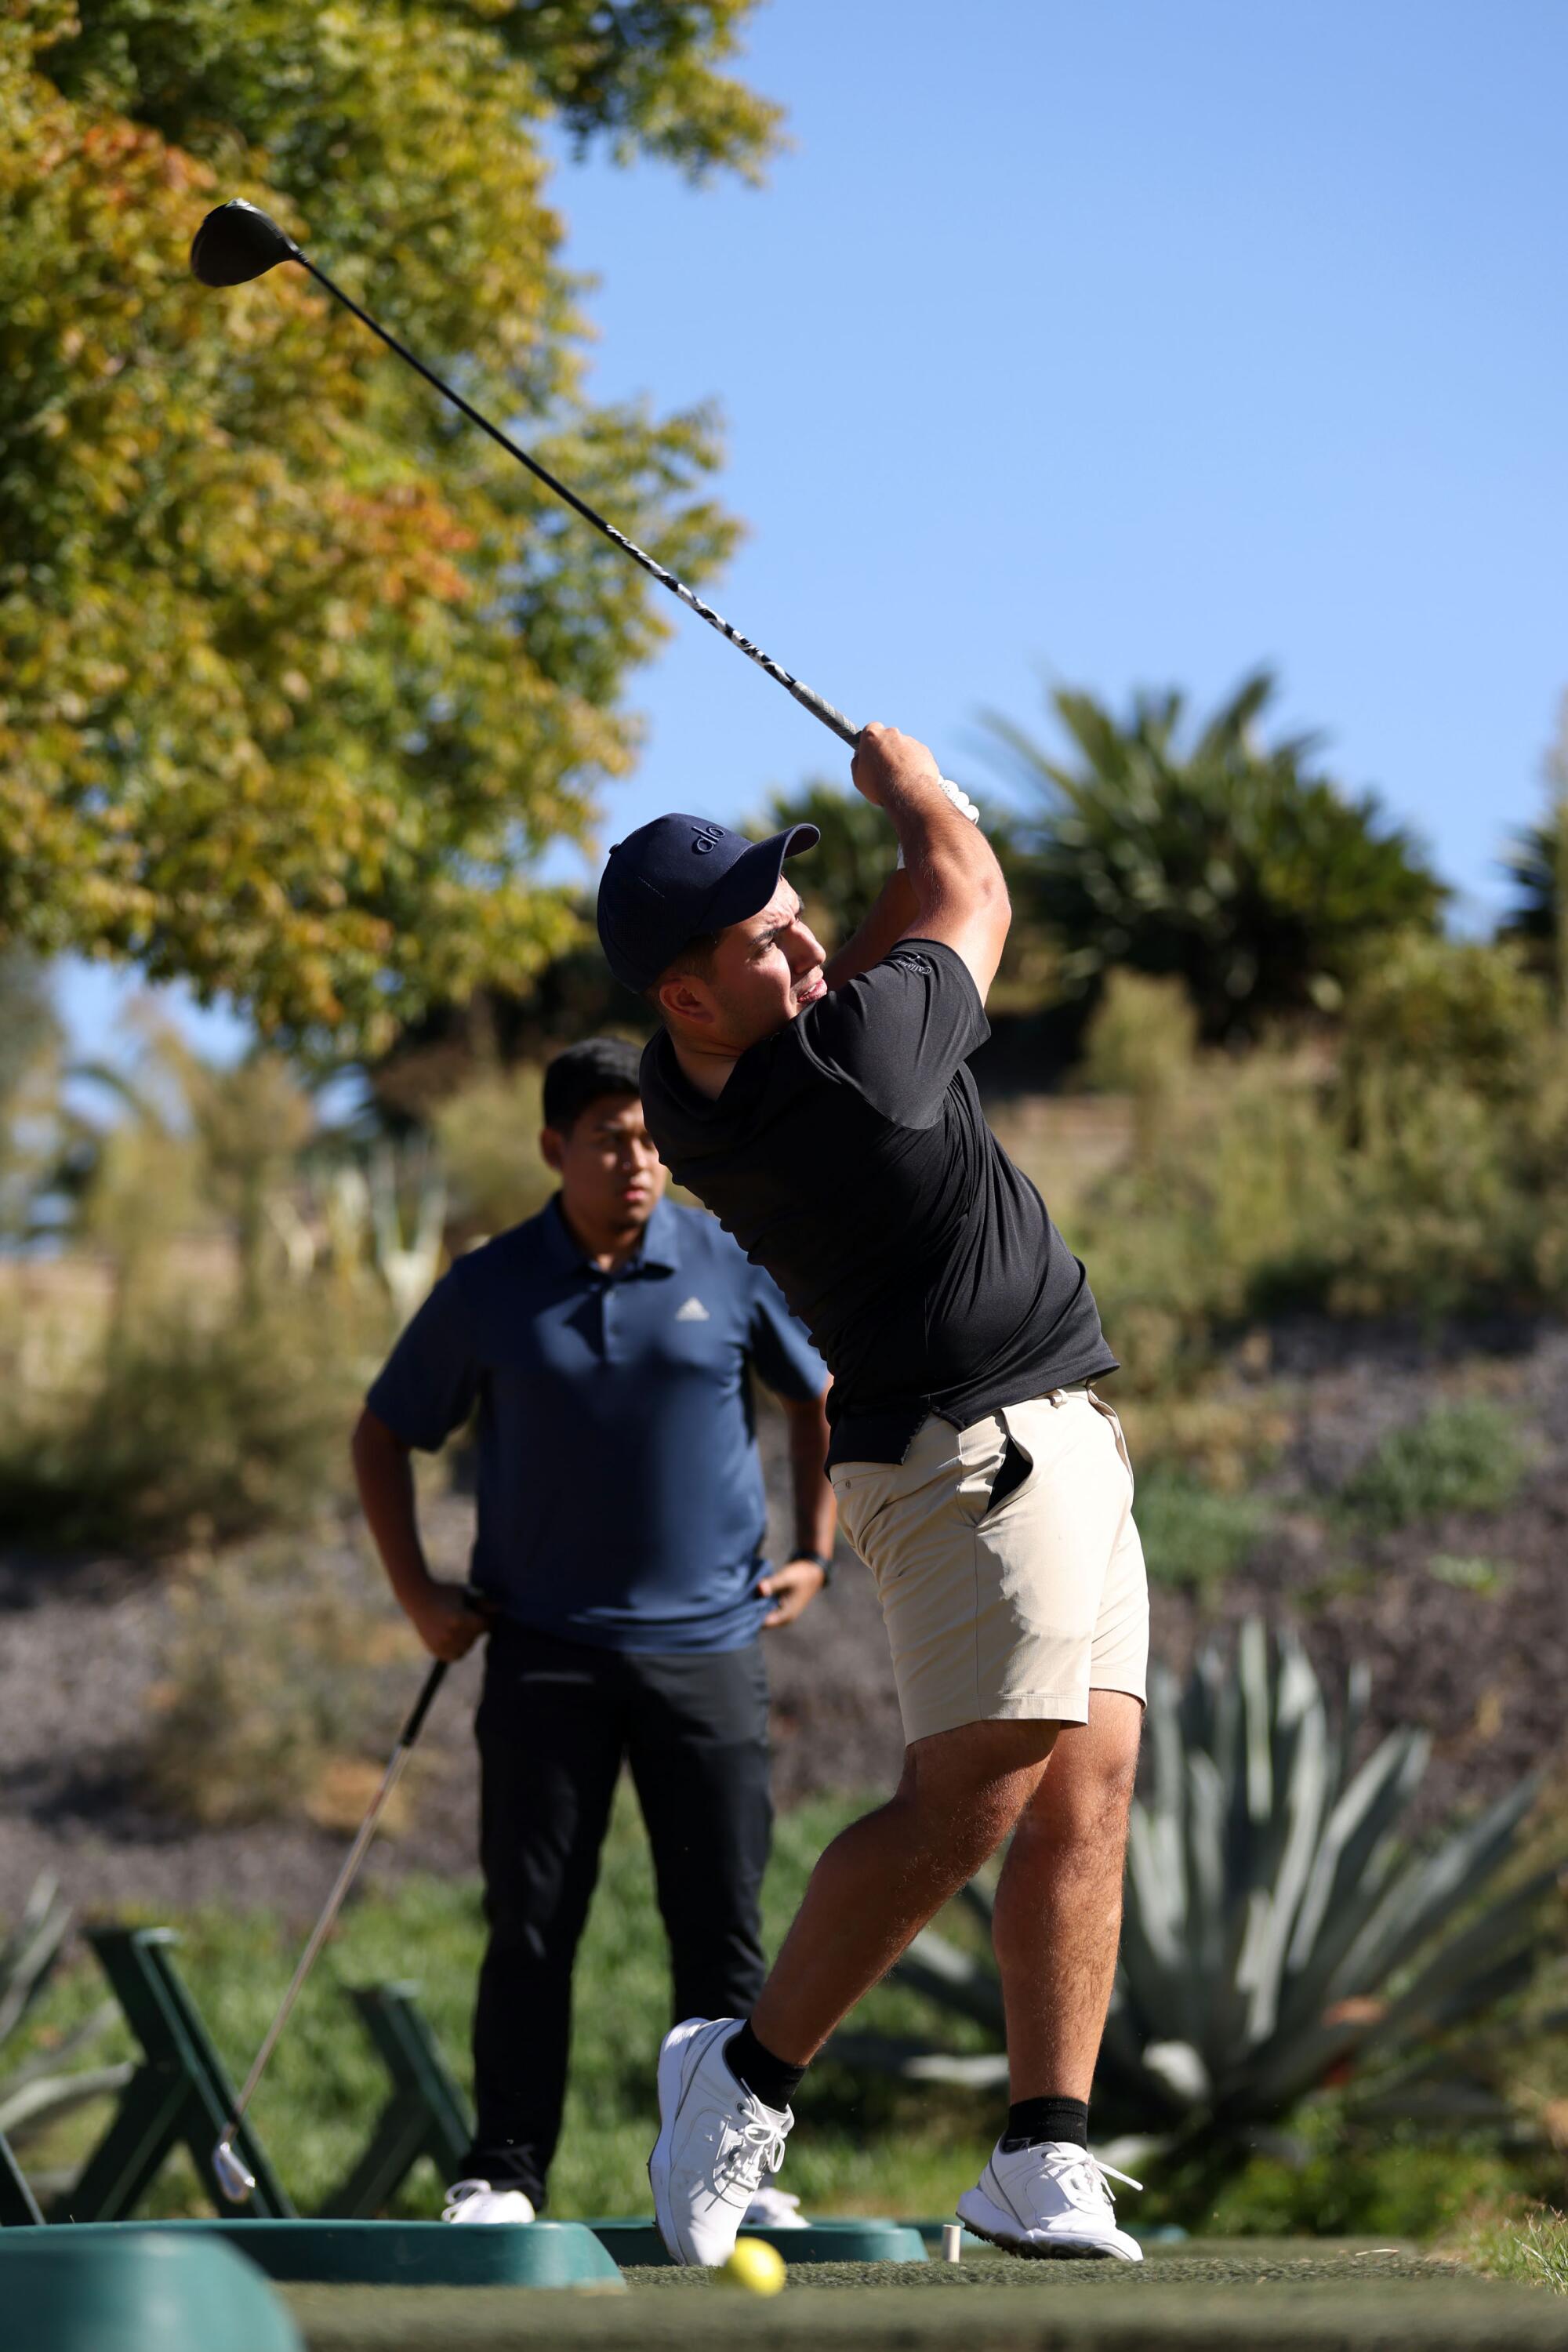 Pedro Tovar of Eslabón Armado tees off at a golf course while wearing a black shirt and white shorts.